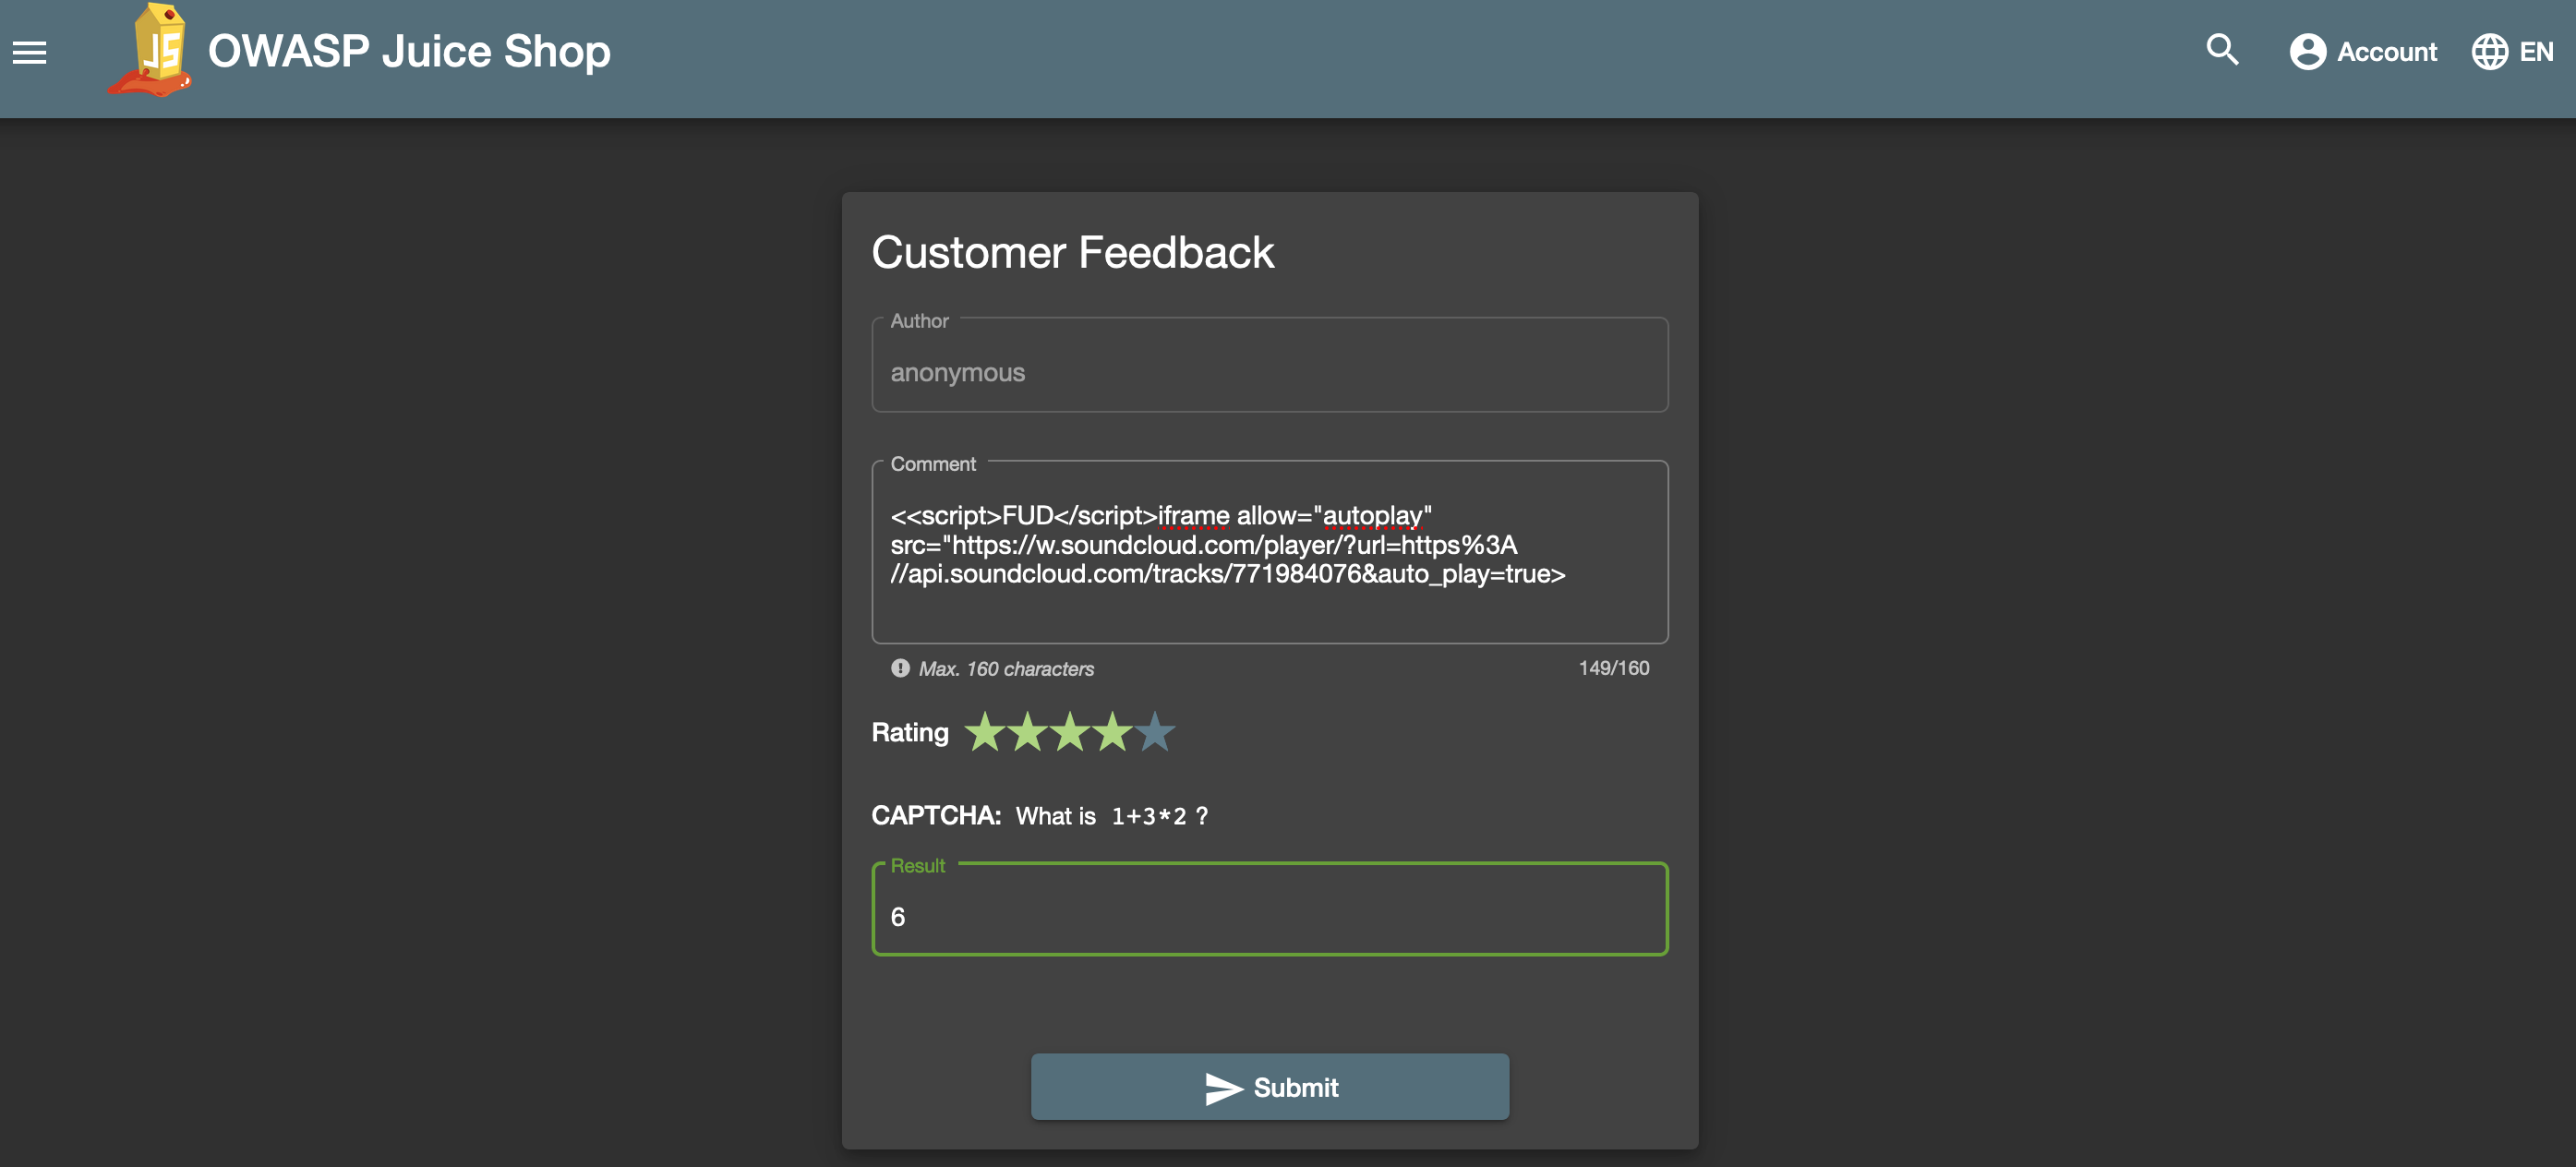 ../../_images/xss_cust_feedback_form.png